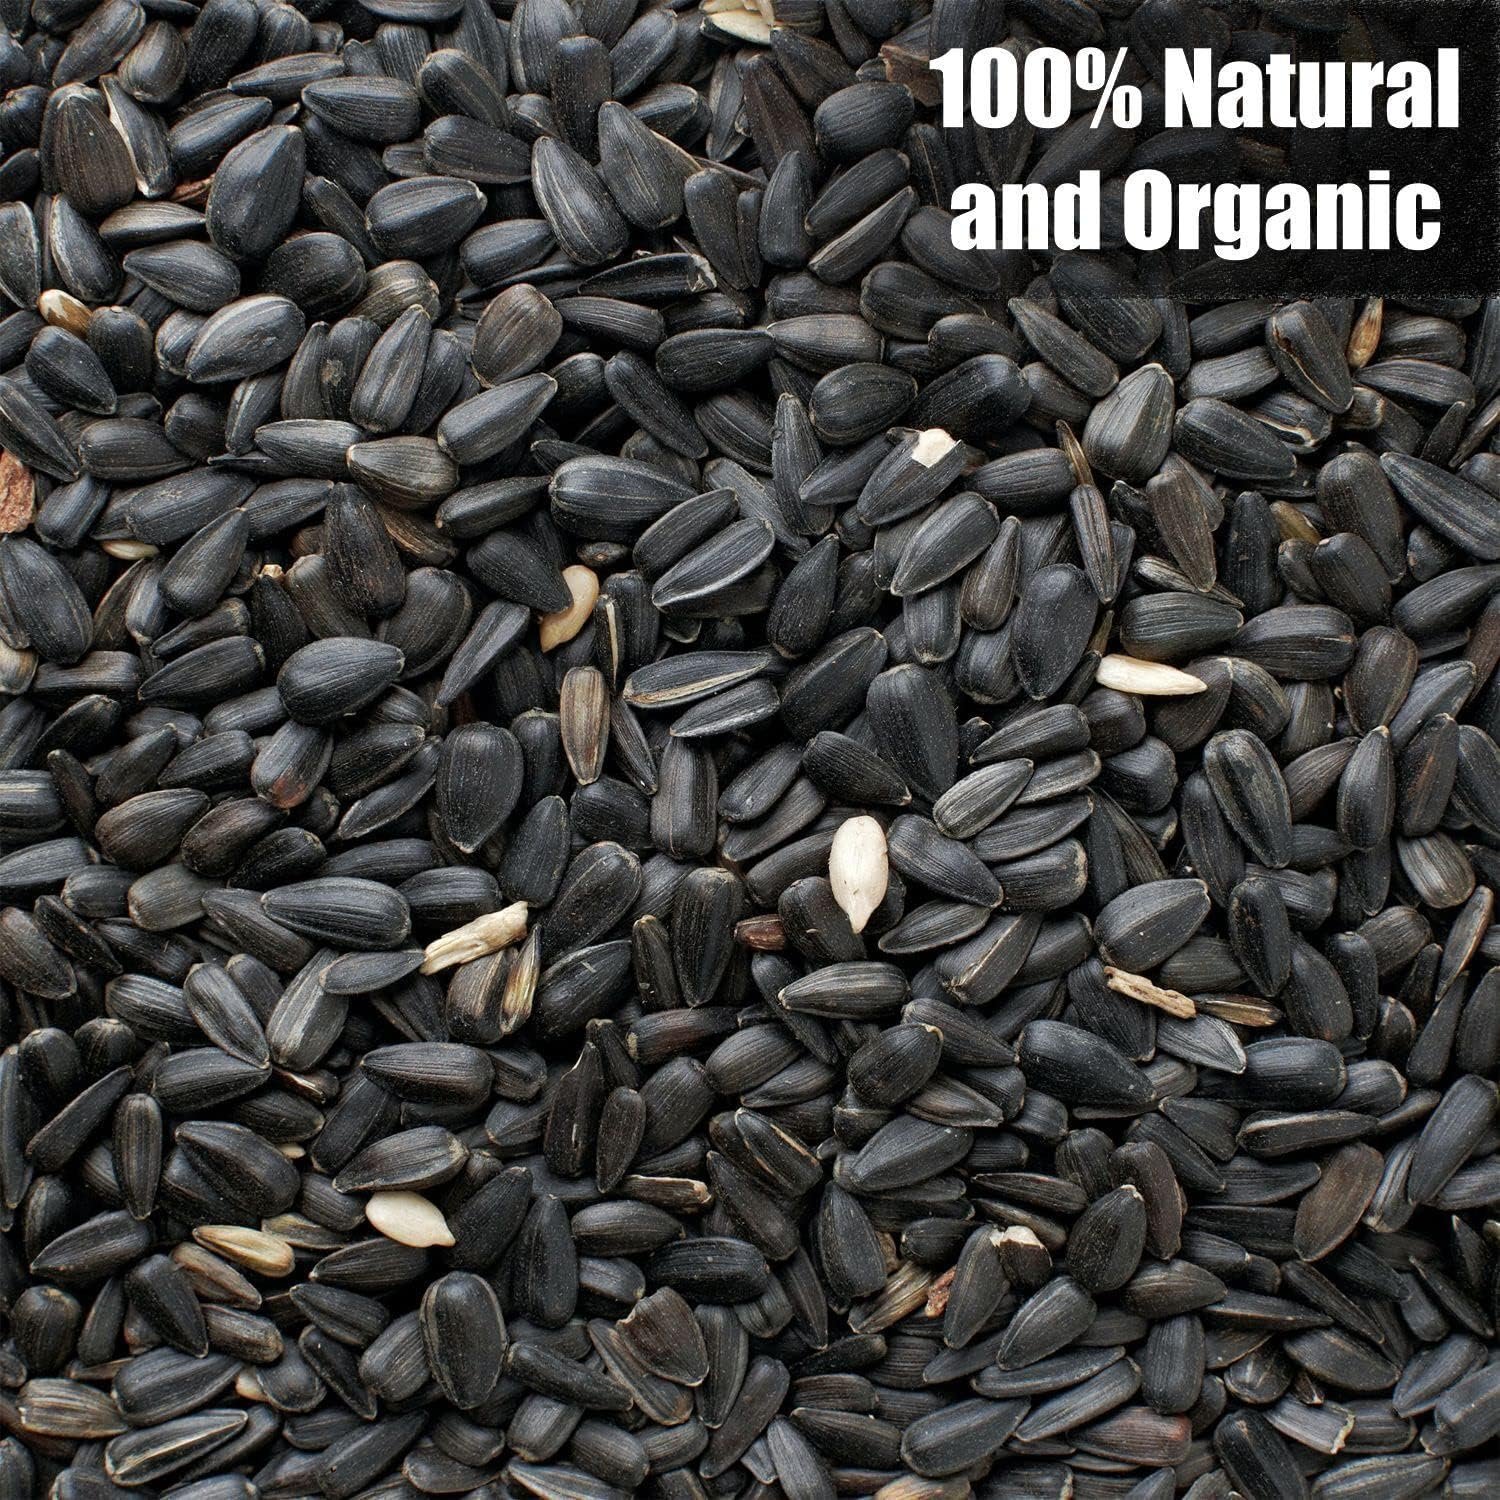 Old Potters Wildlife Black Oil Sunflower Seeds for Wildlife Bird Feed, USA Grown Non-GMO, Attracts Birds (Large, 12, Pound)